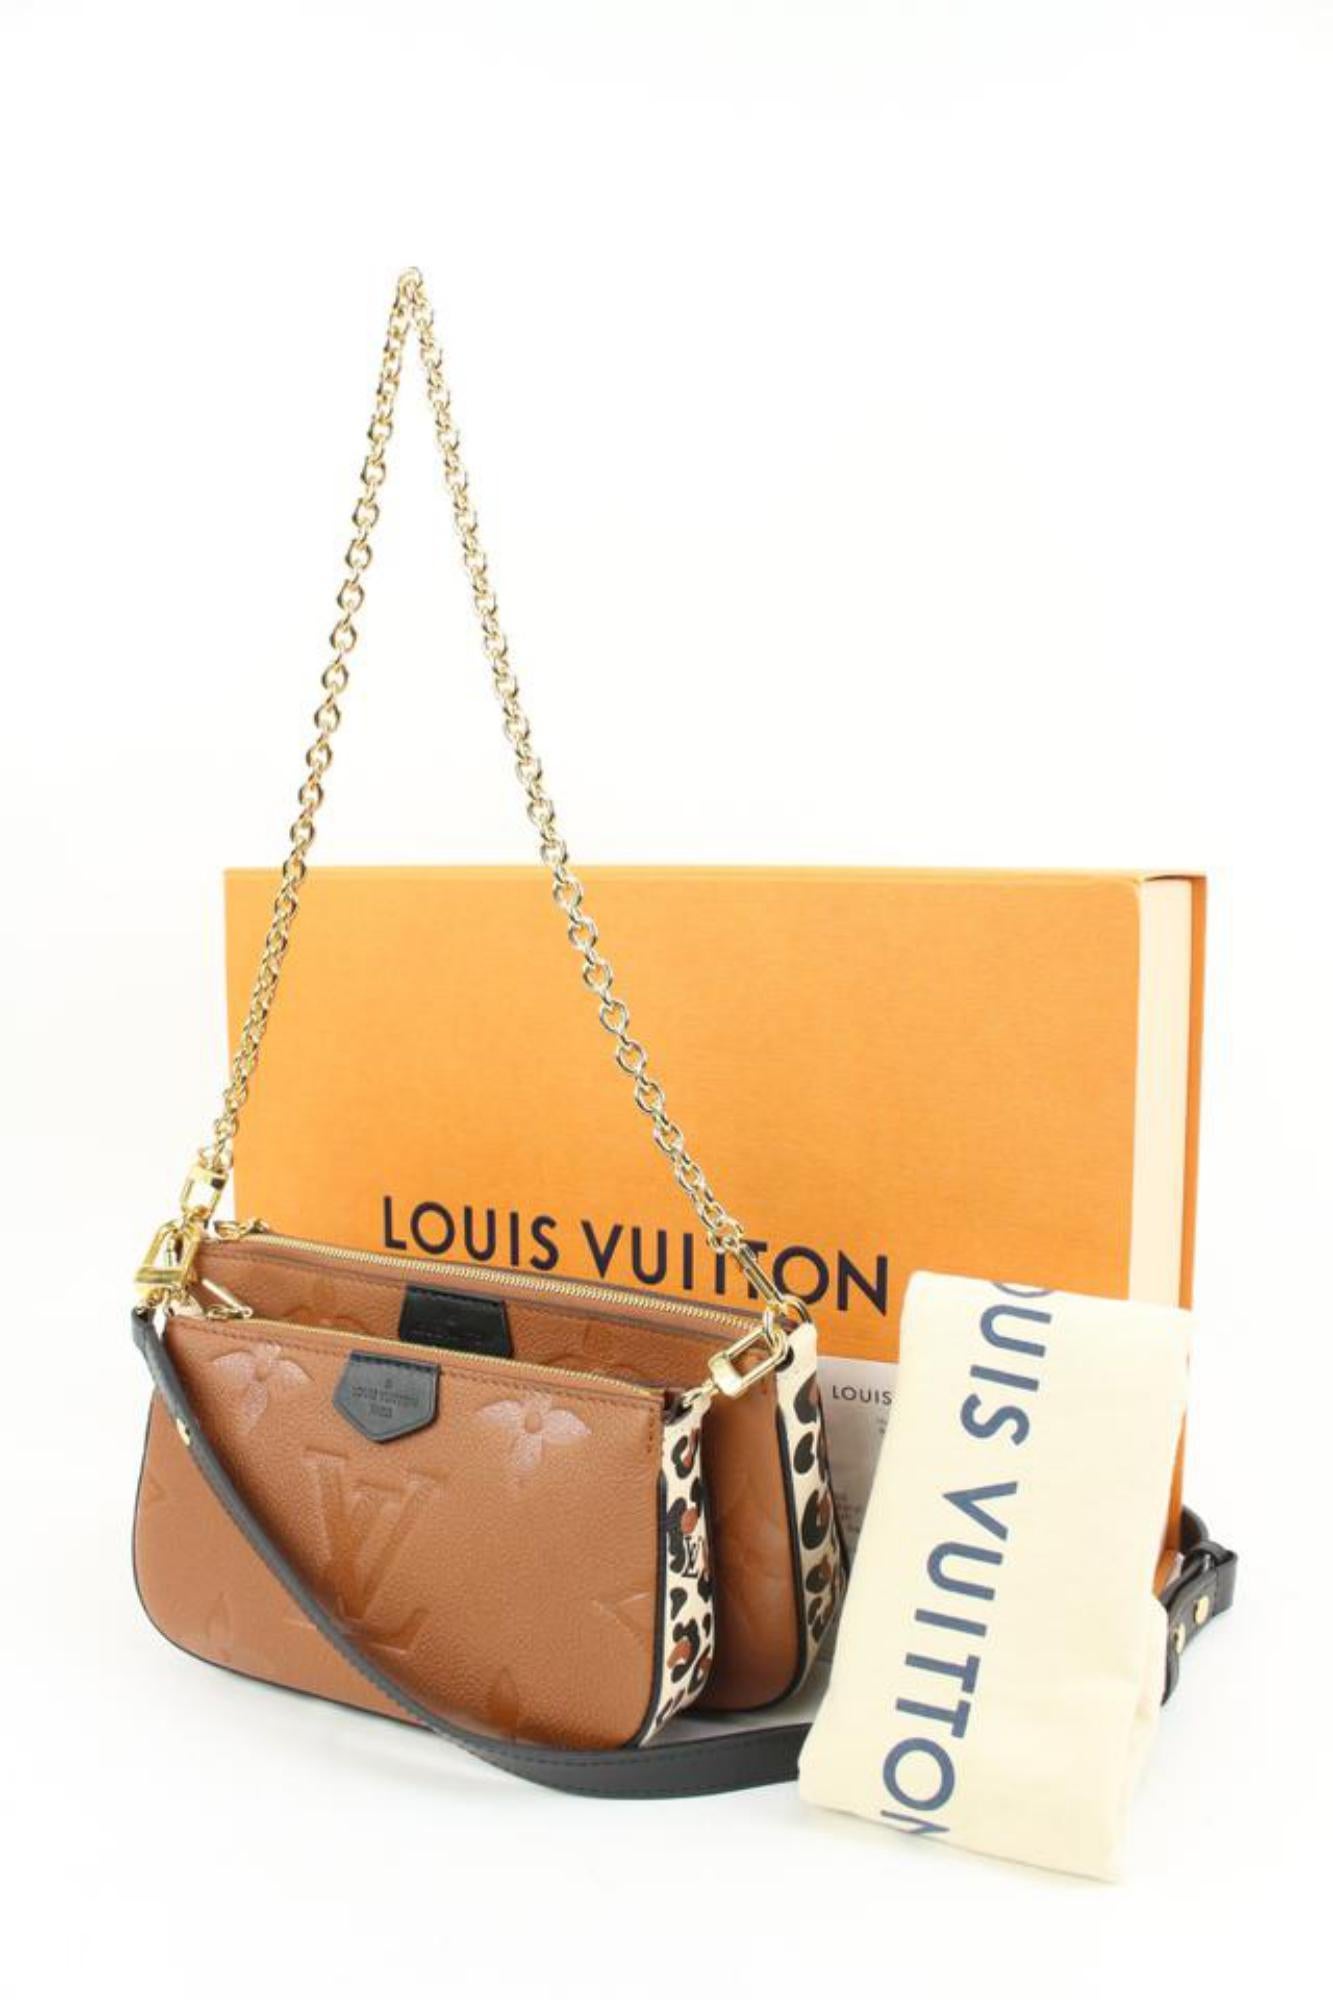 Louis VuittonCaramel Monogram Wild At Heart Multi Pochette Accessoires 77lk317s
Date Code/Serial Number: RFID Chip
Made In: France
Measurements: Length:  9.5